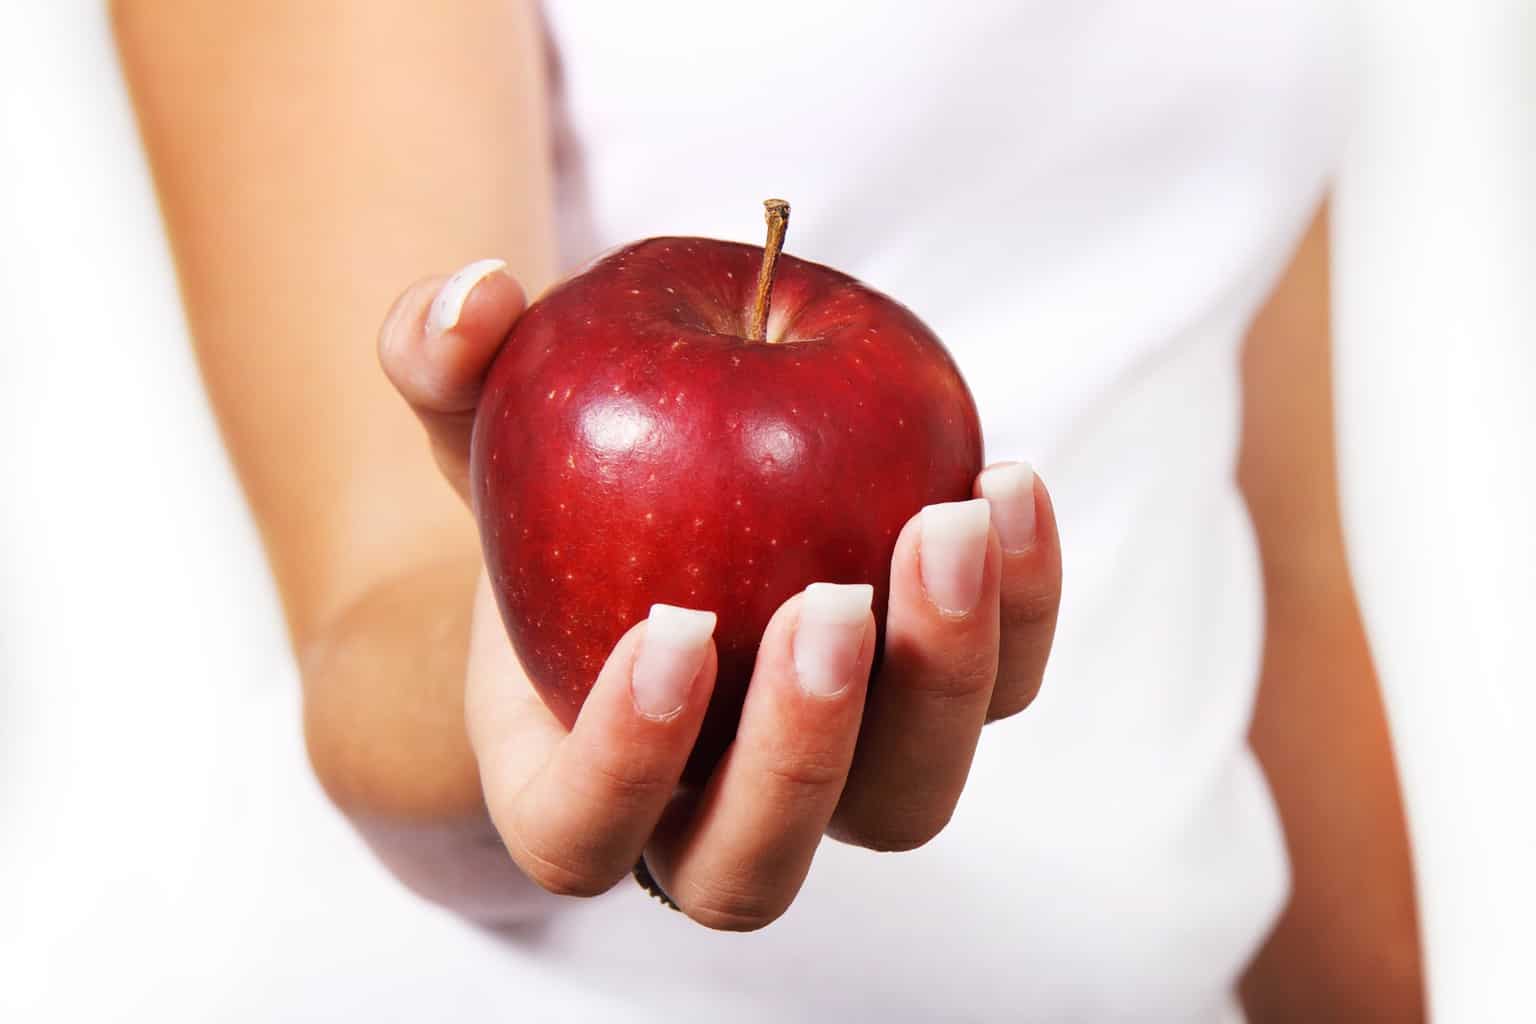 Wonder Fruit: Weight Loss Benefits of Adding Apples to Your Diet